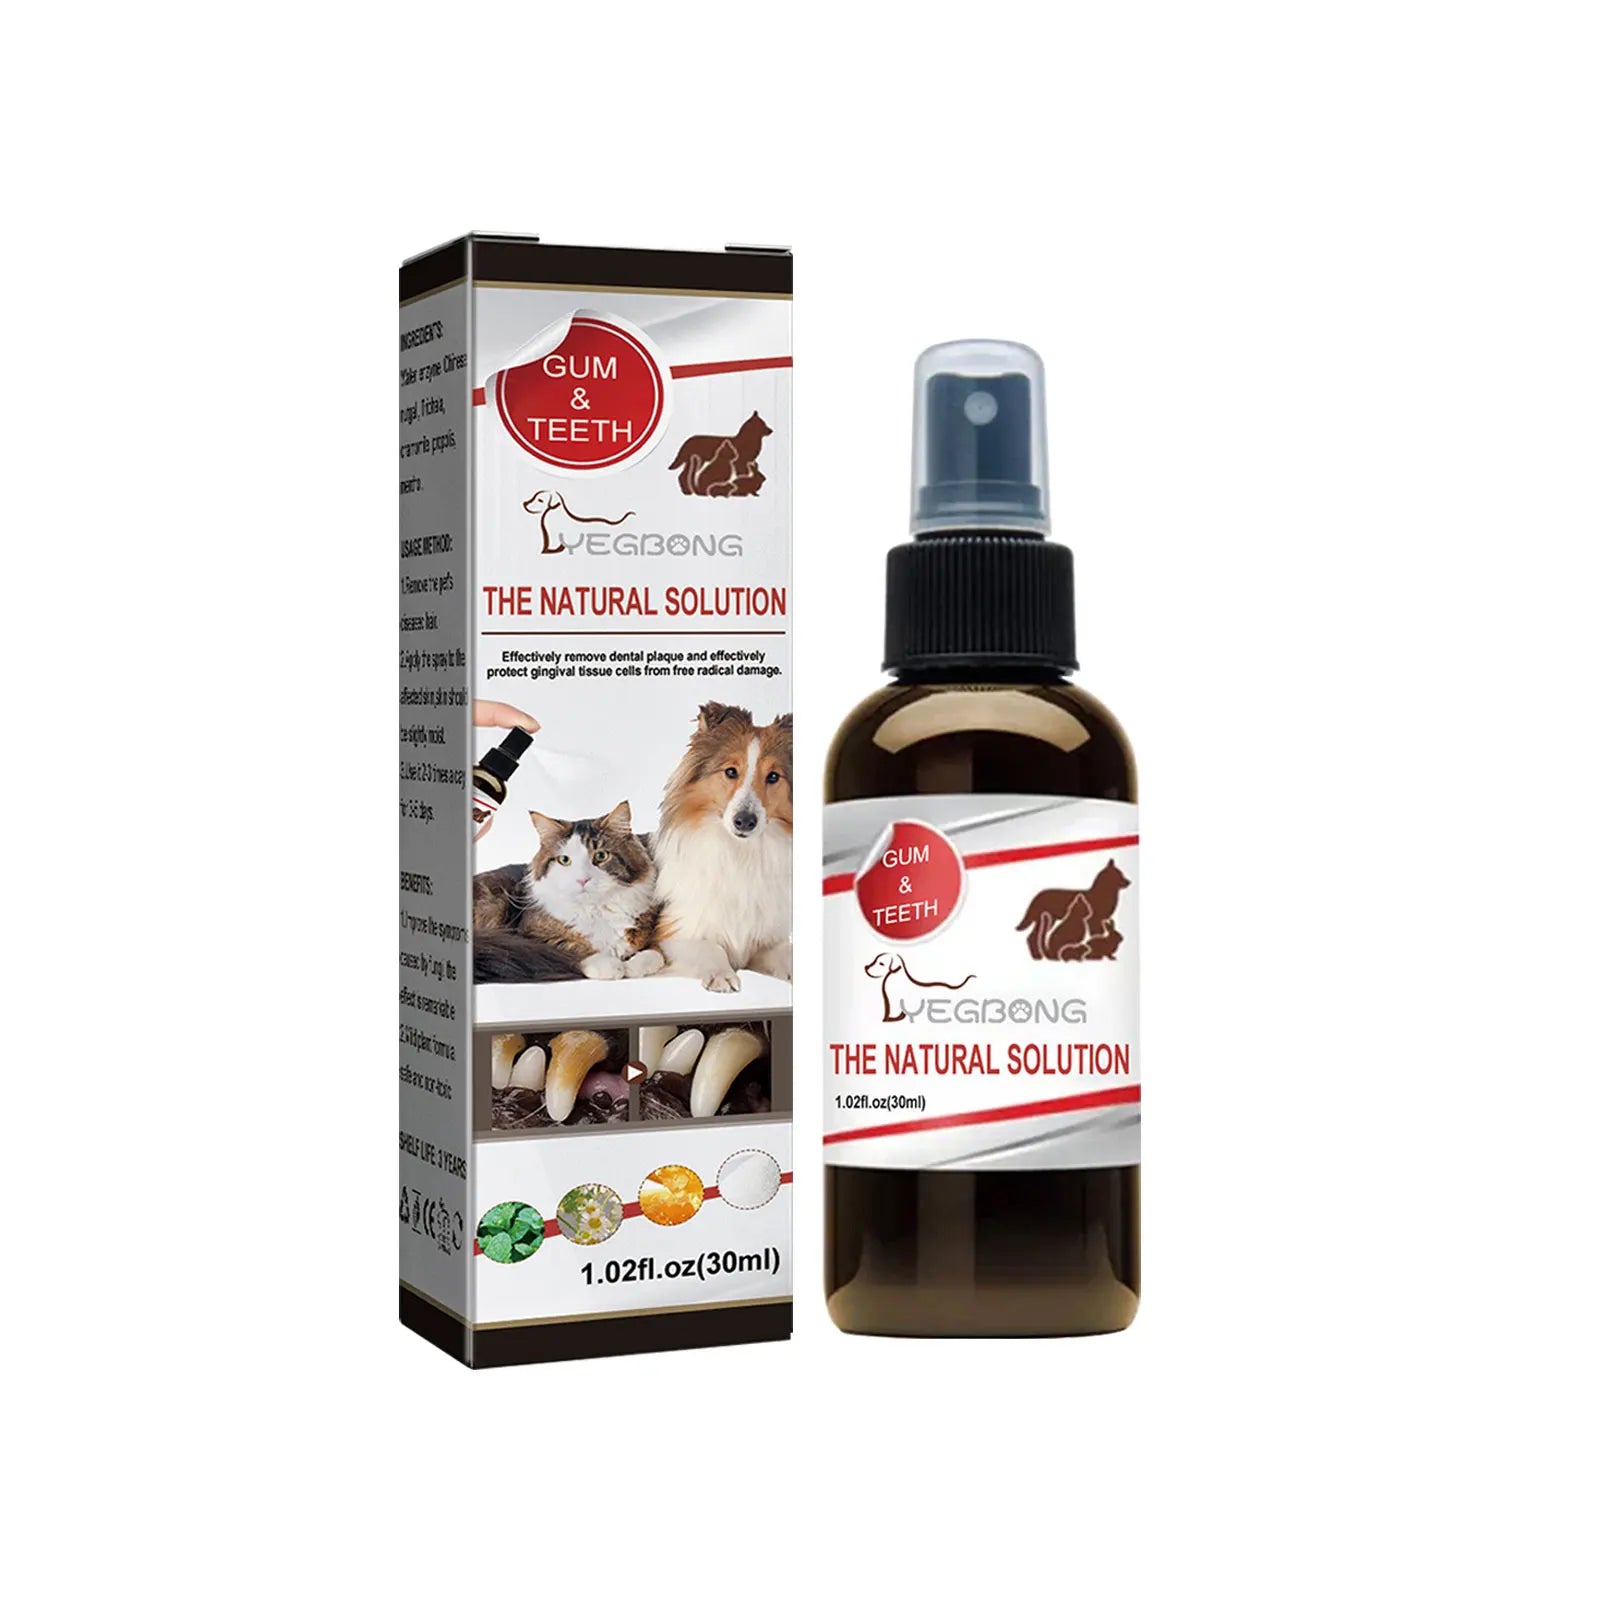 Pet Tooth Cleaning Spray